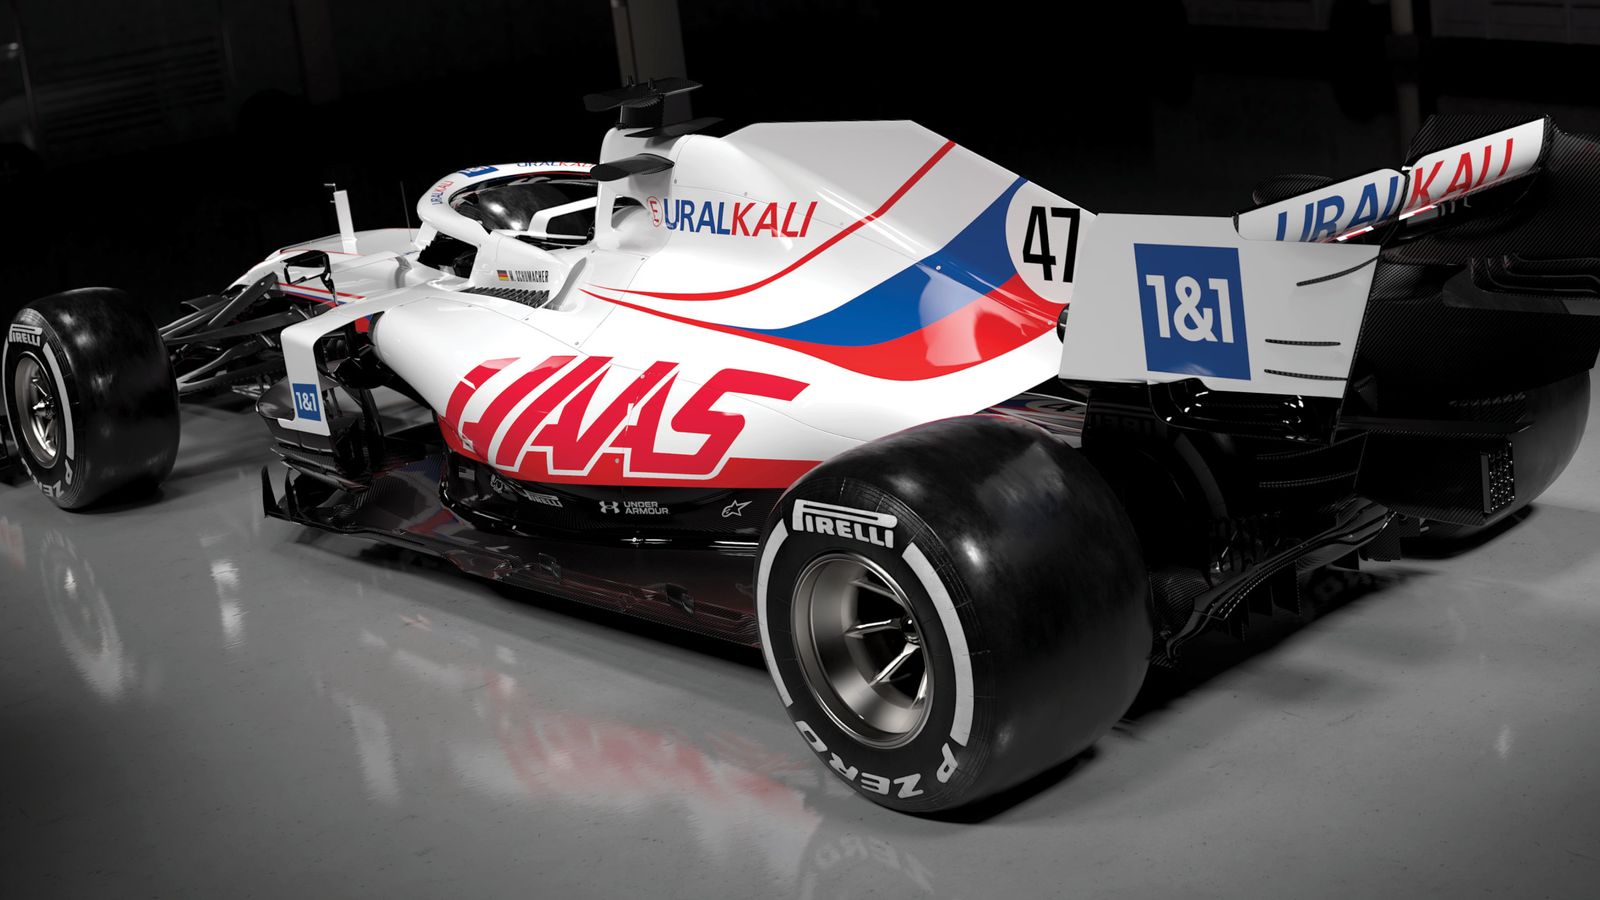 Haas Unveil New Look Livery For 2021 Formula 1 Season For All Rookie Mick Schumacher, Nikita Mazepin Line Up